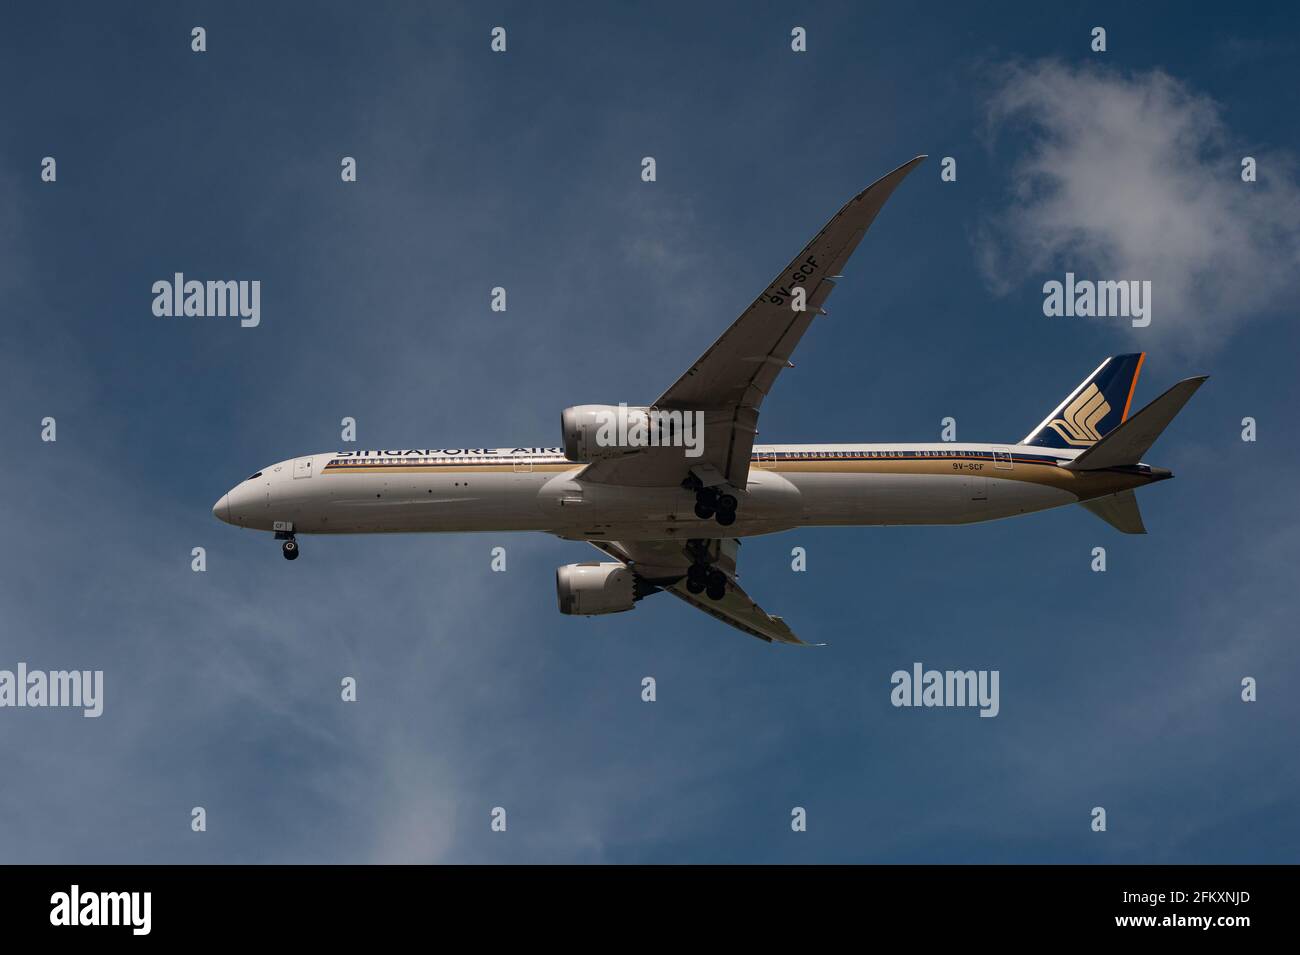 01.05.2021, Singapore, Republic of Singapore, Asia - Singapore Airlines Boeing 787-10 Dreamliner passenger plane approaches Changi Airport for landing. Stock Photo